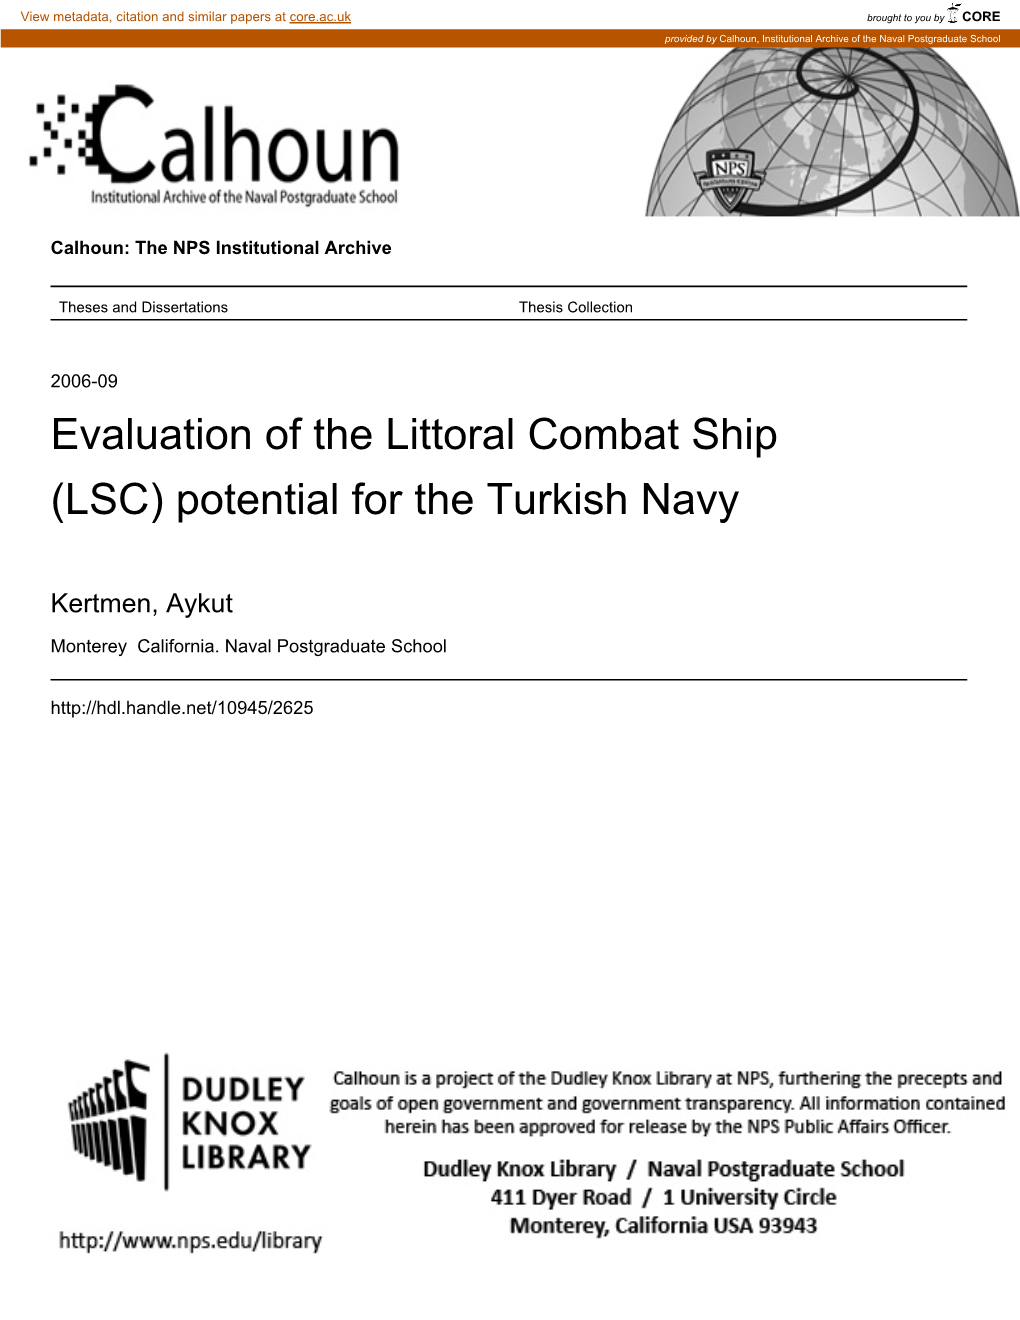 Evaluation of the Littoral Combat Ship (LSC) Potential for the Turkish Navy